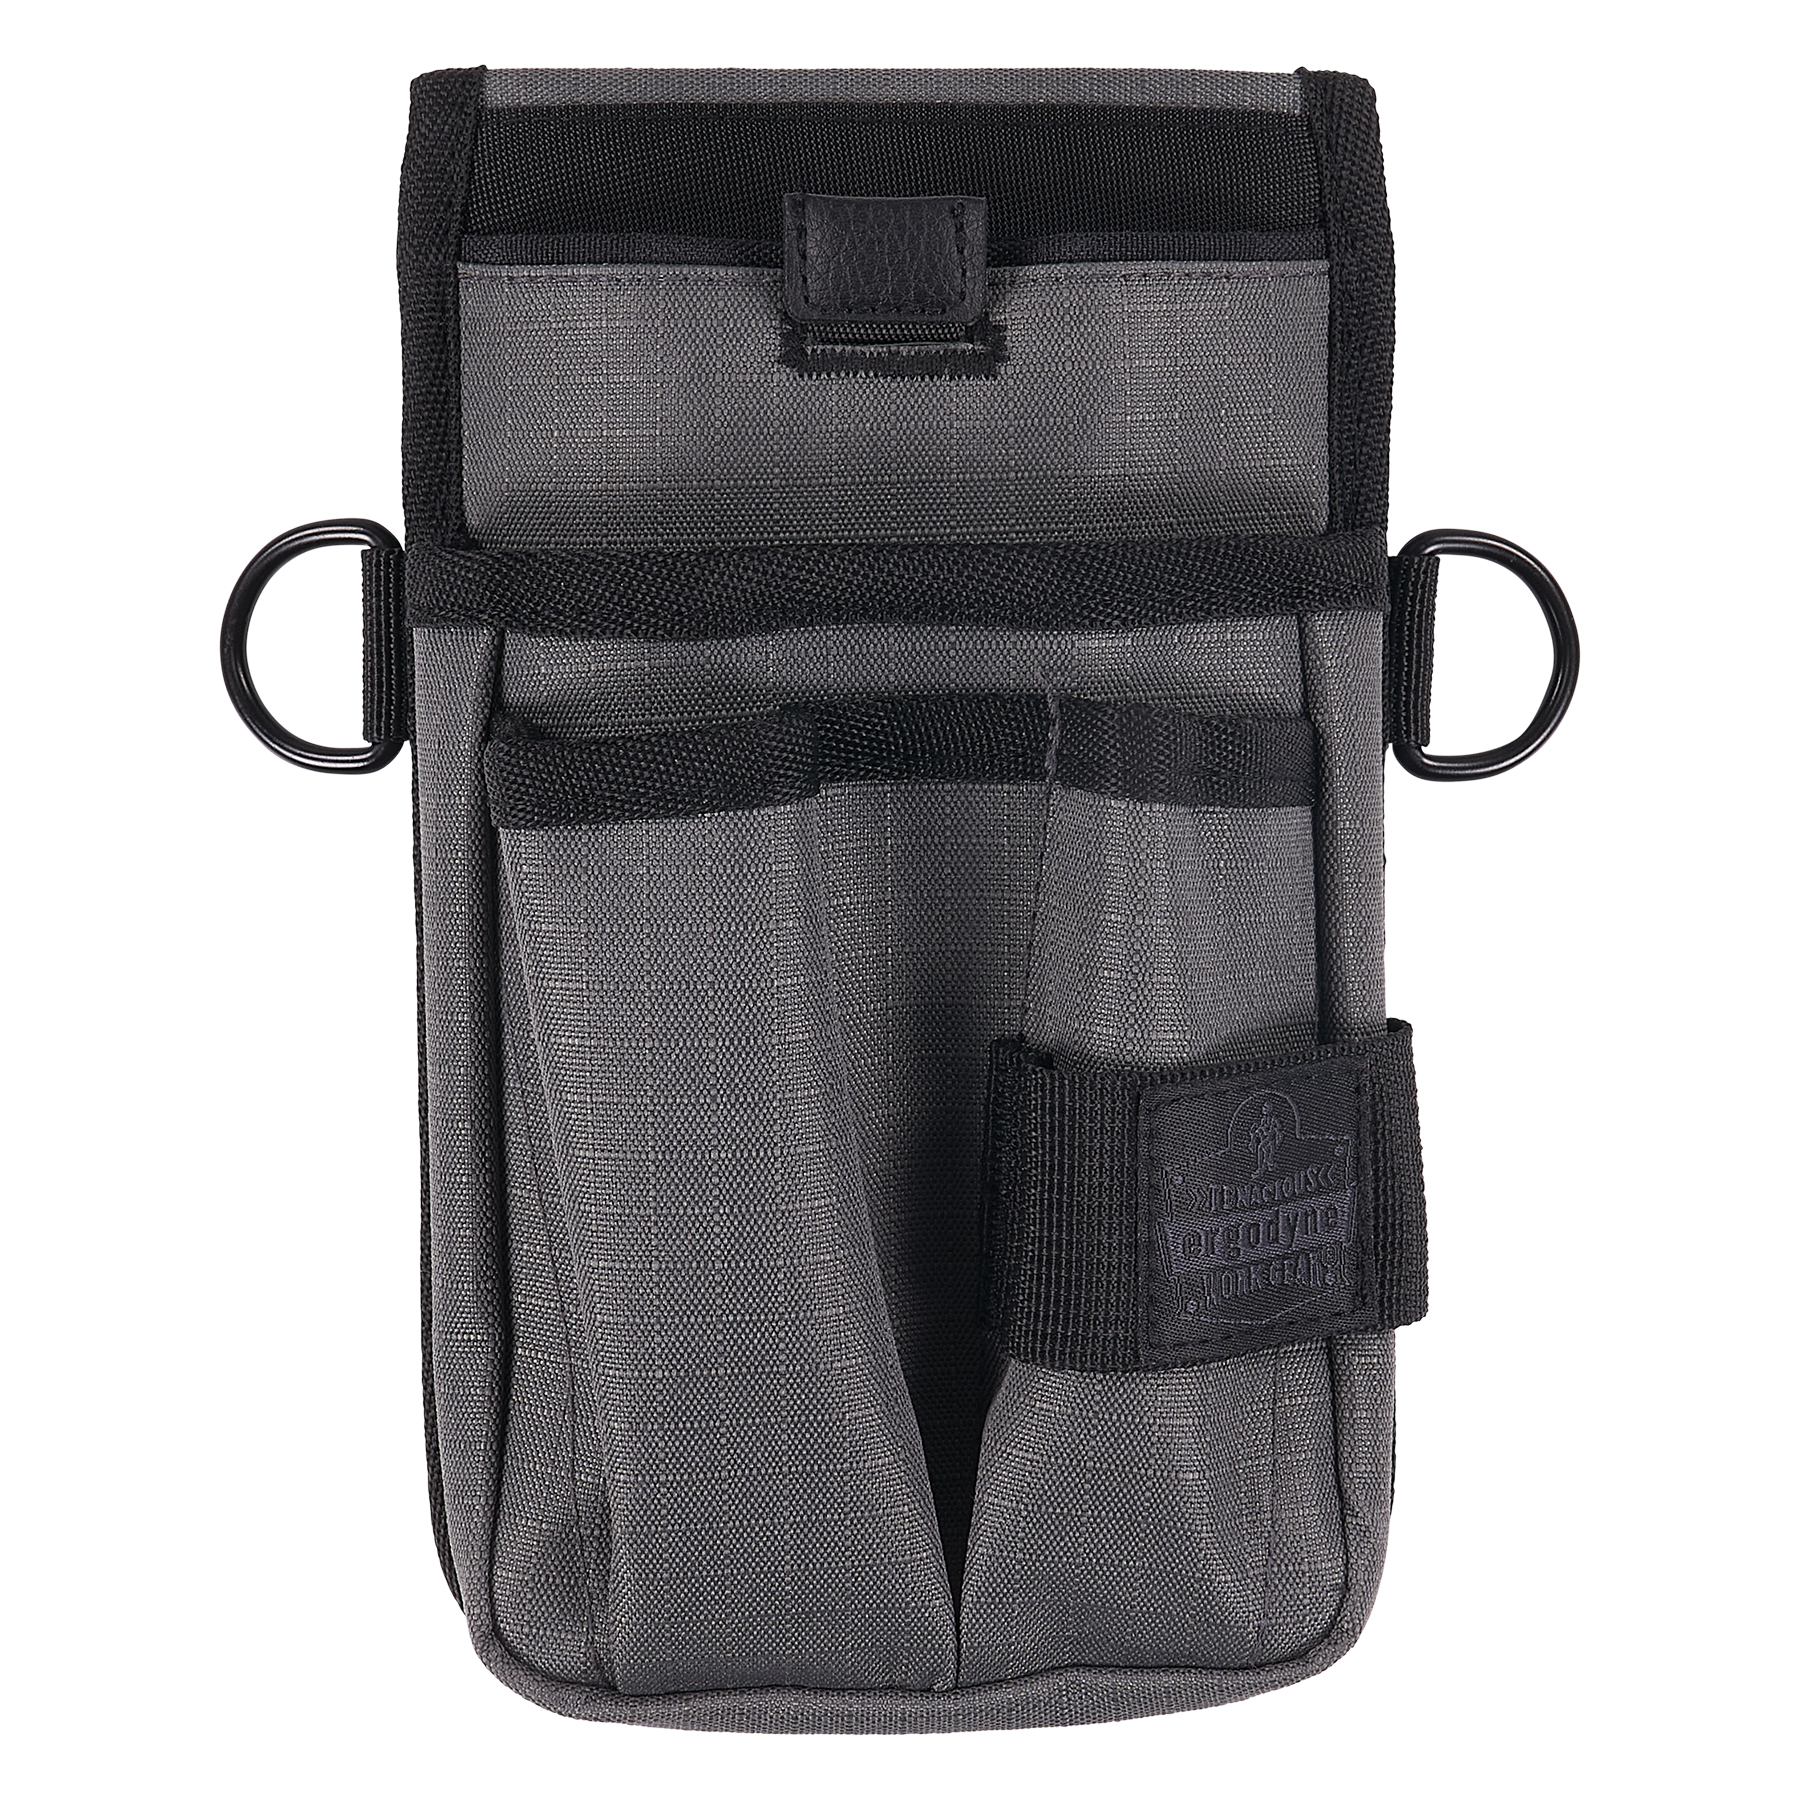 https://www.ergodyne.com/sites/default/files/product-images/5568-tool-pouch-device-holster-belt-loop-front.jpg